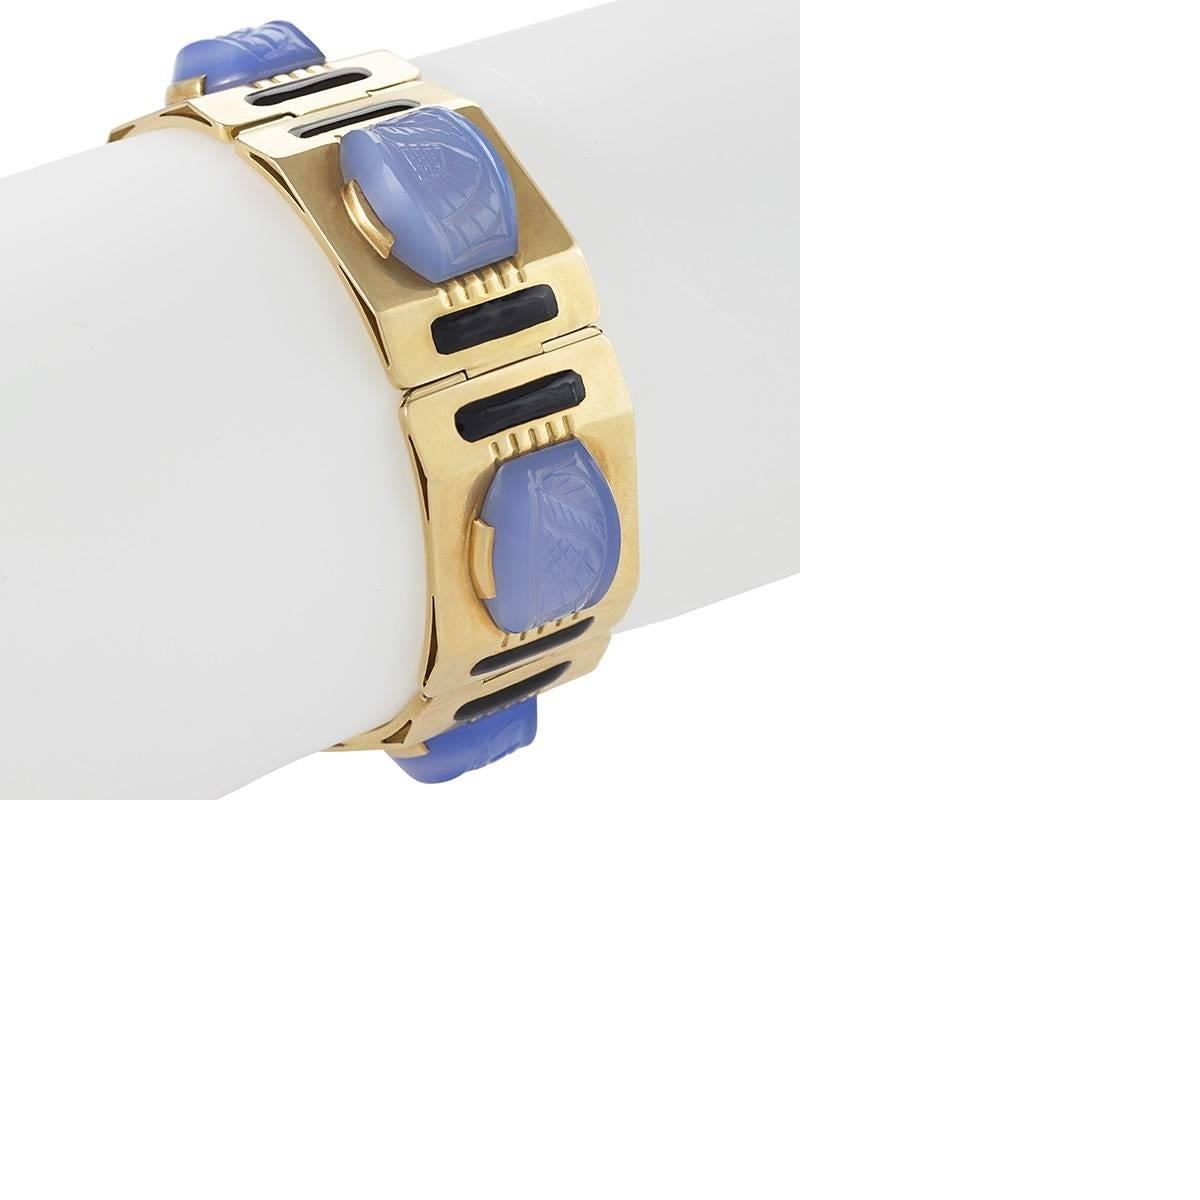 Created in the 1950s, this Sasportas bracelet is composed carved blue chalcedony, polished gold, and black enamel. Designed as a plaque bracelet of canted edges and reverse arches, each link is set with stylized, leaf-carved chalcedony tablet